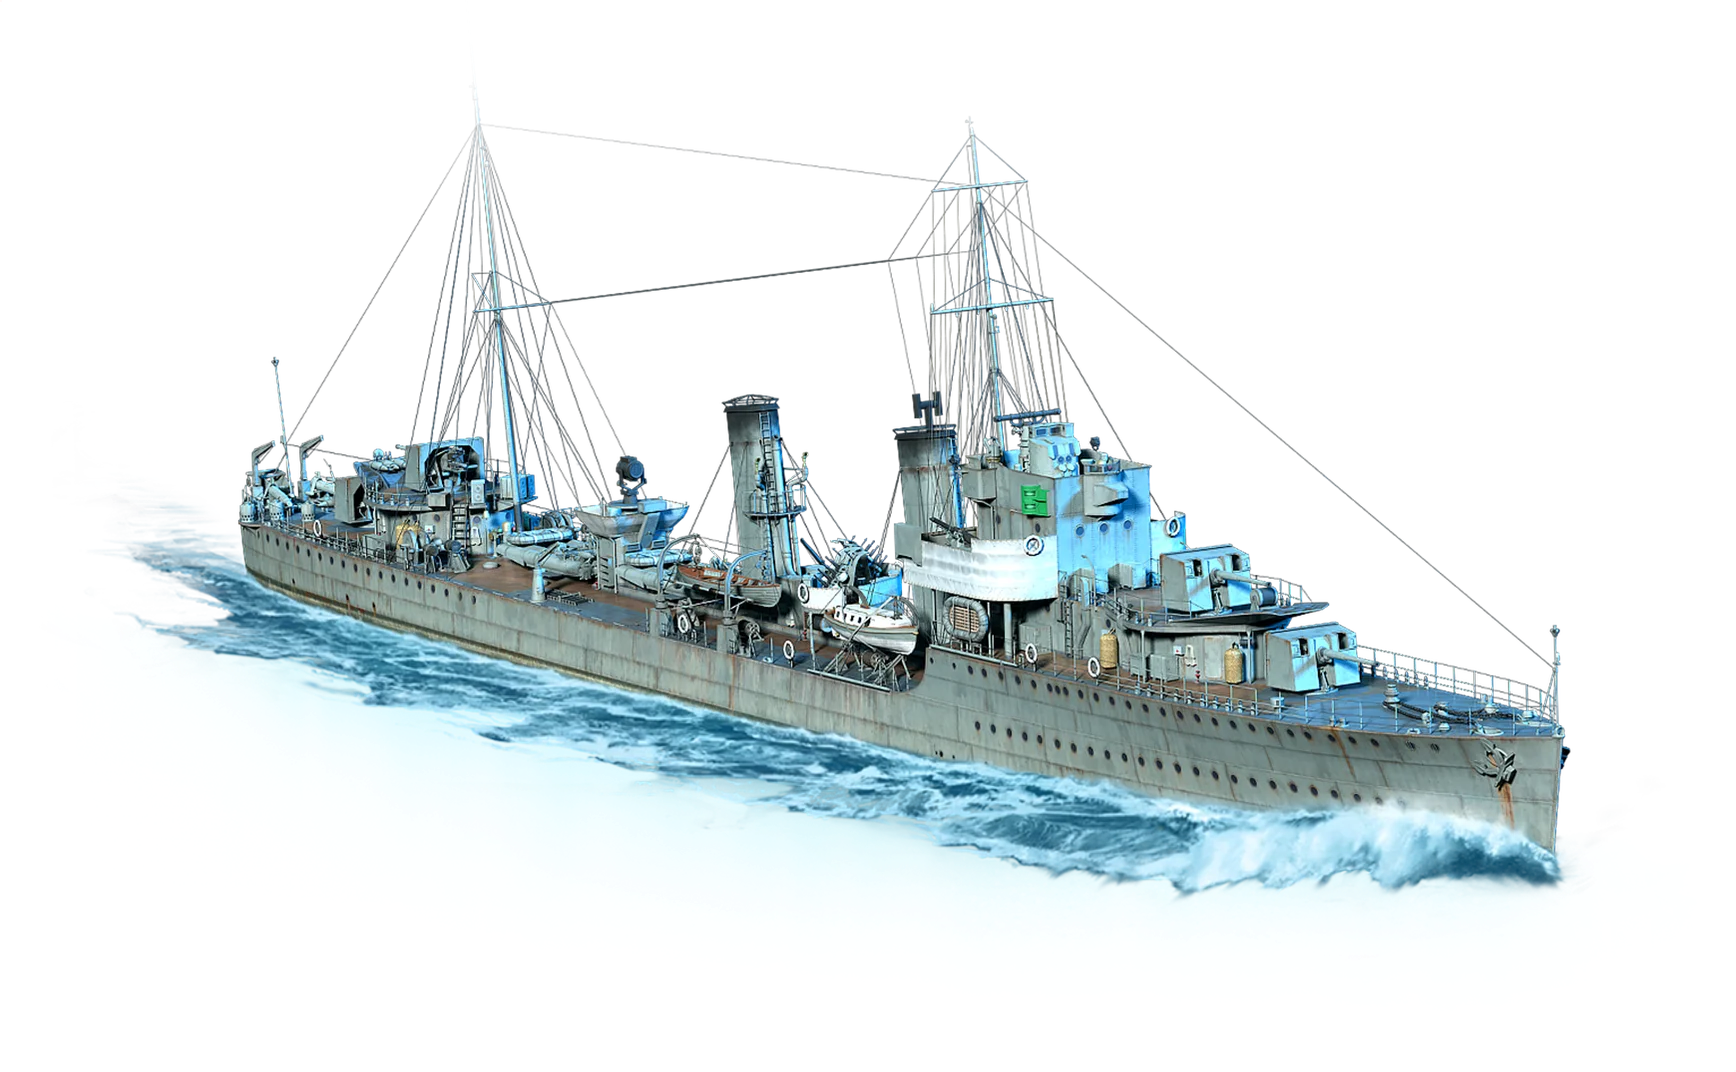 Acasta from World Of Warships: Legends